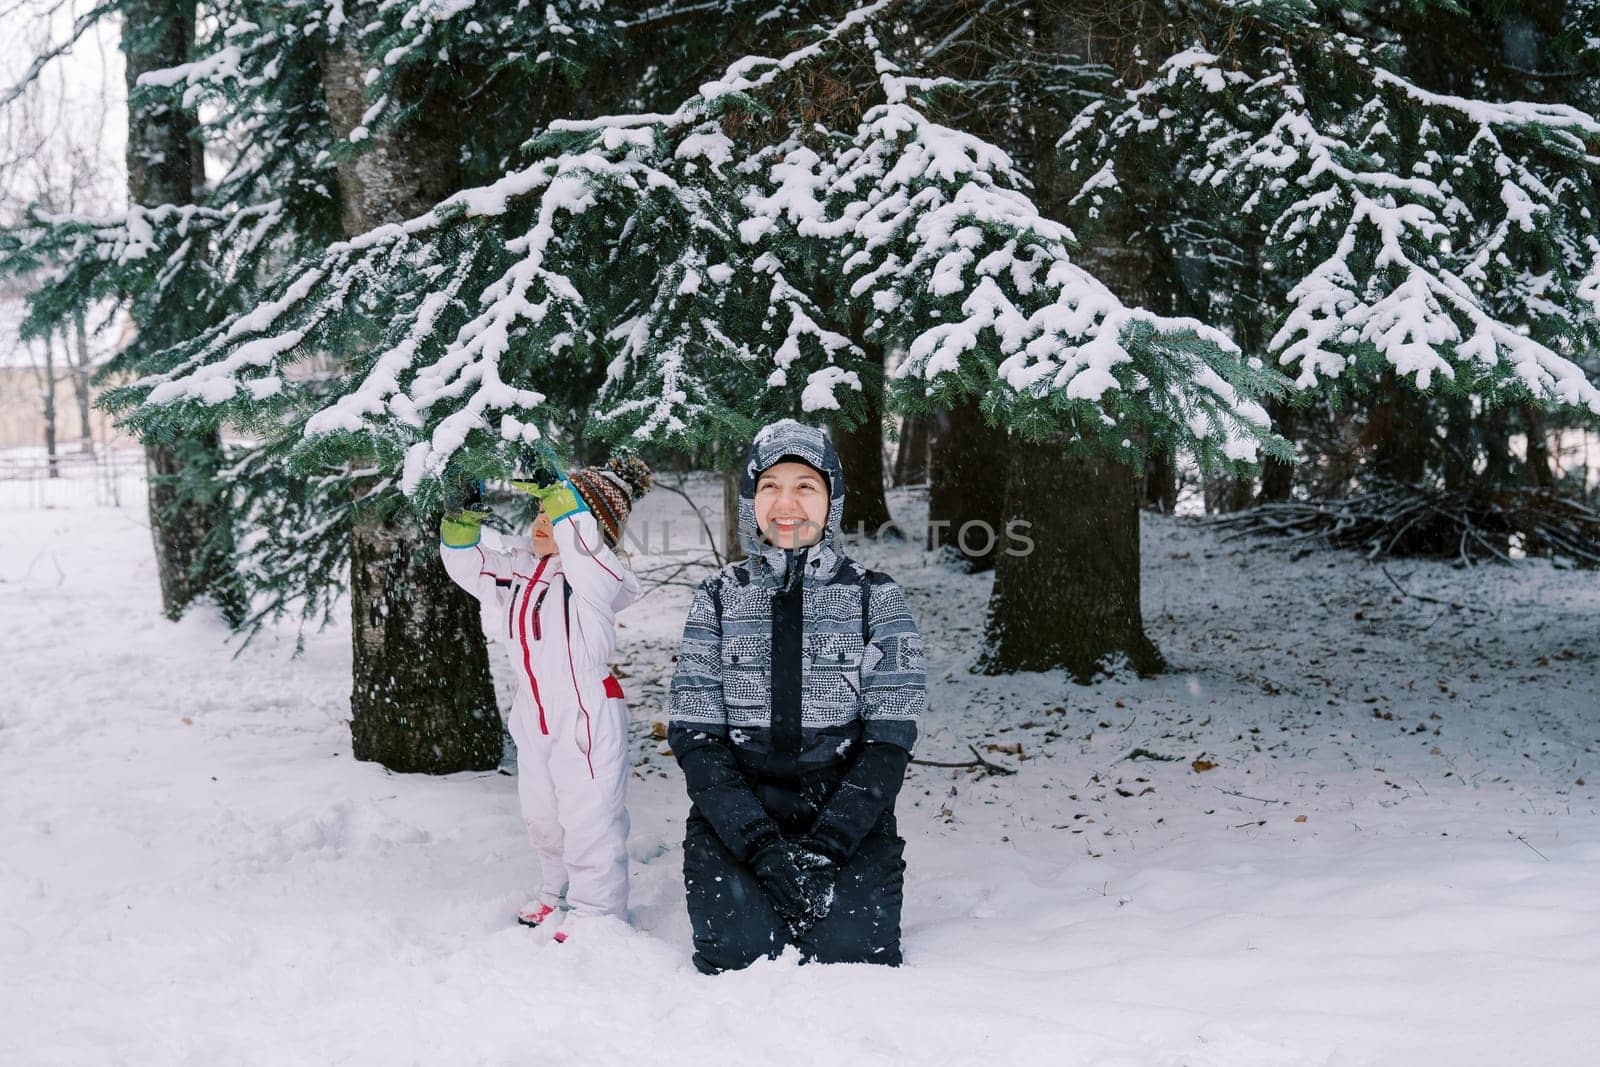 Smiling mother in a ski suit sits on her knees in the snow near a small child standing near a snow-covered pine tree. High quality photo